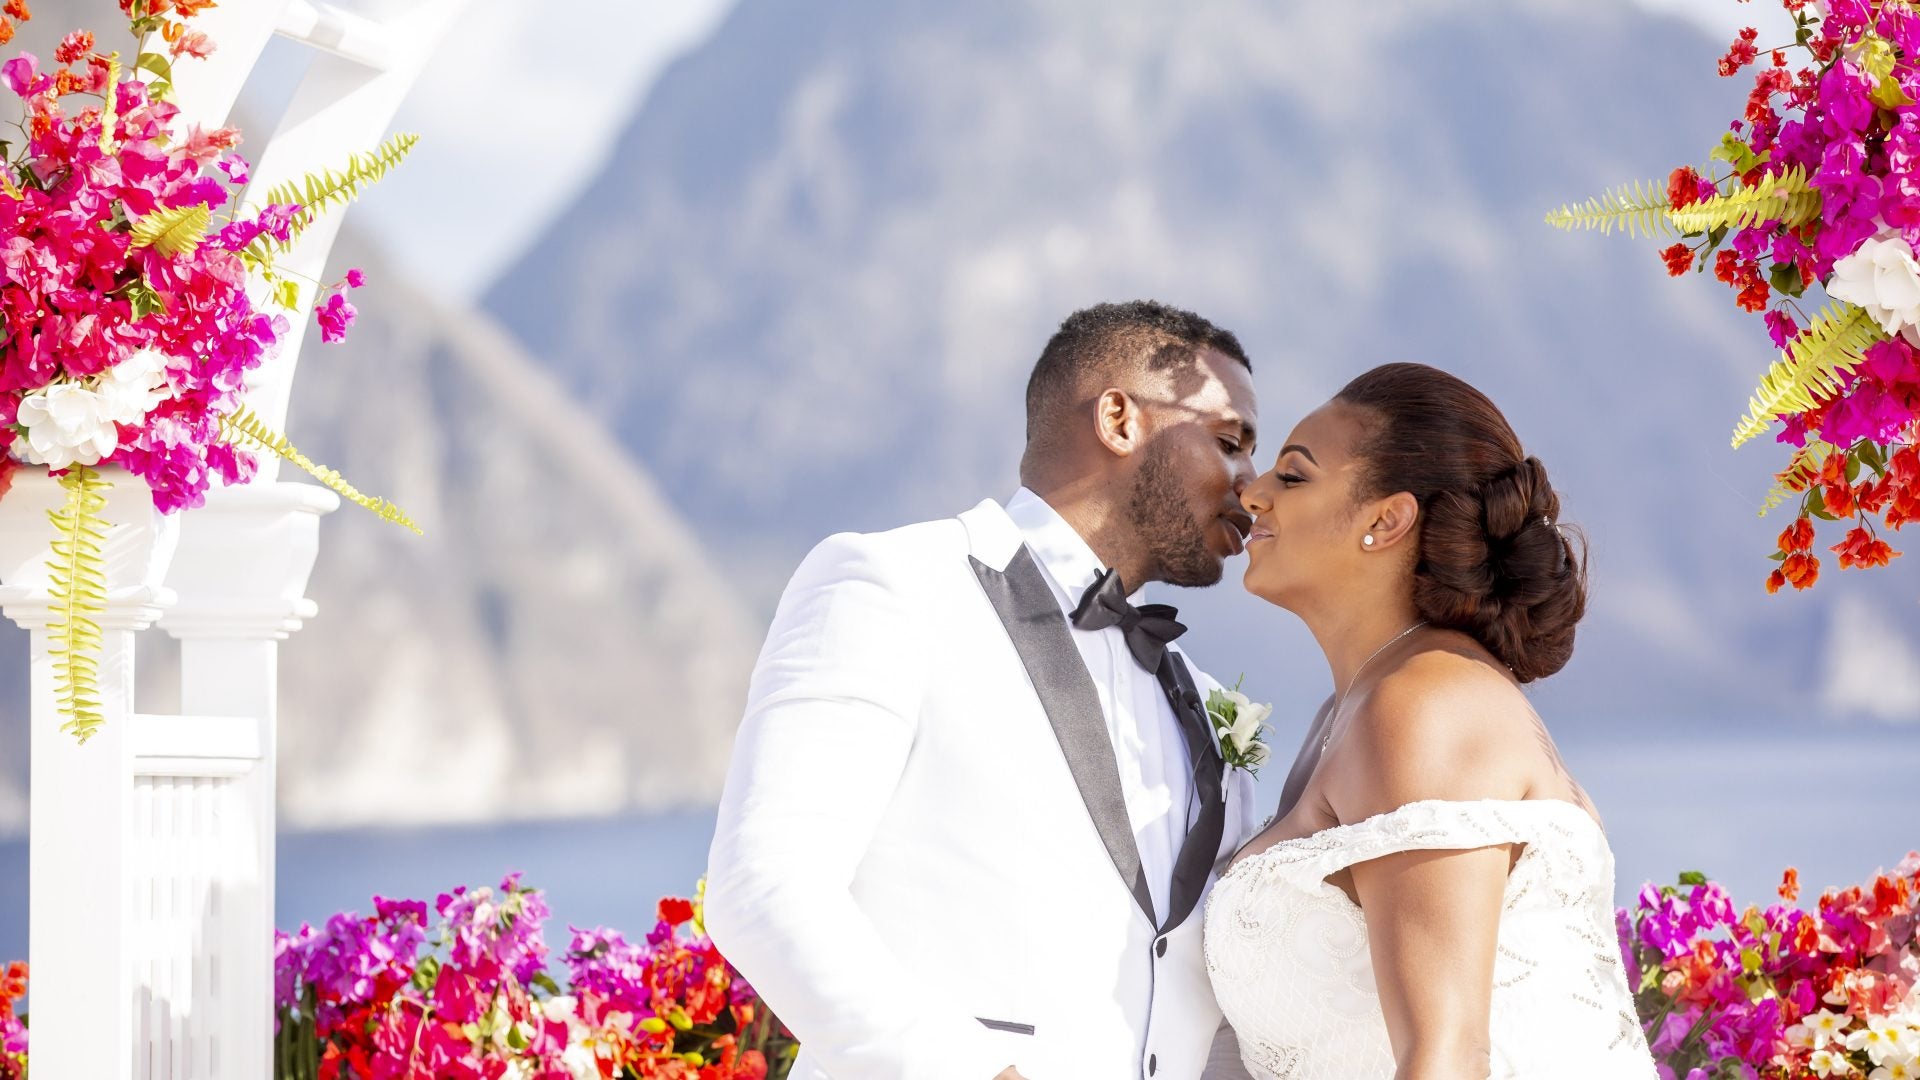 Bridal Bliss: Melissa and Hervan's Sunkissed Ceremony In St. Lucia Looked Like Absolute Paradise